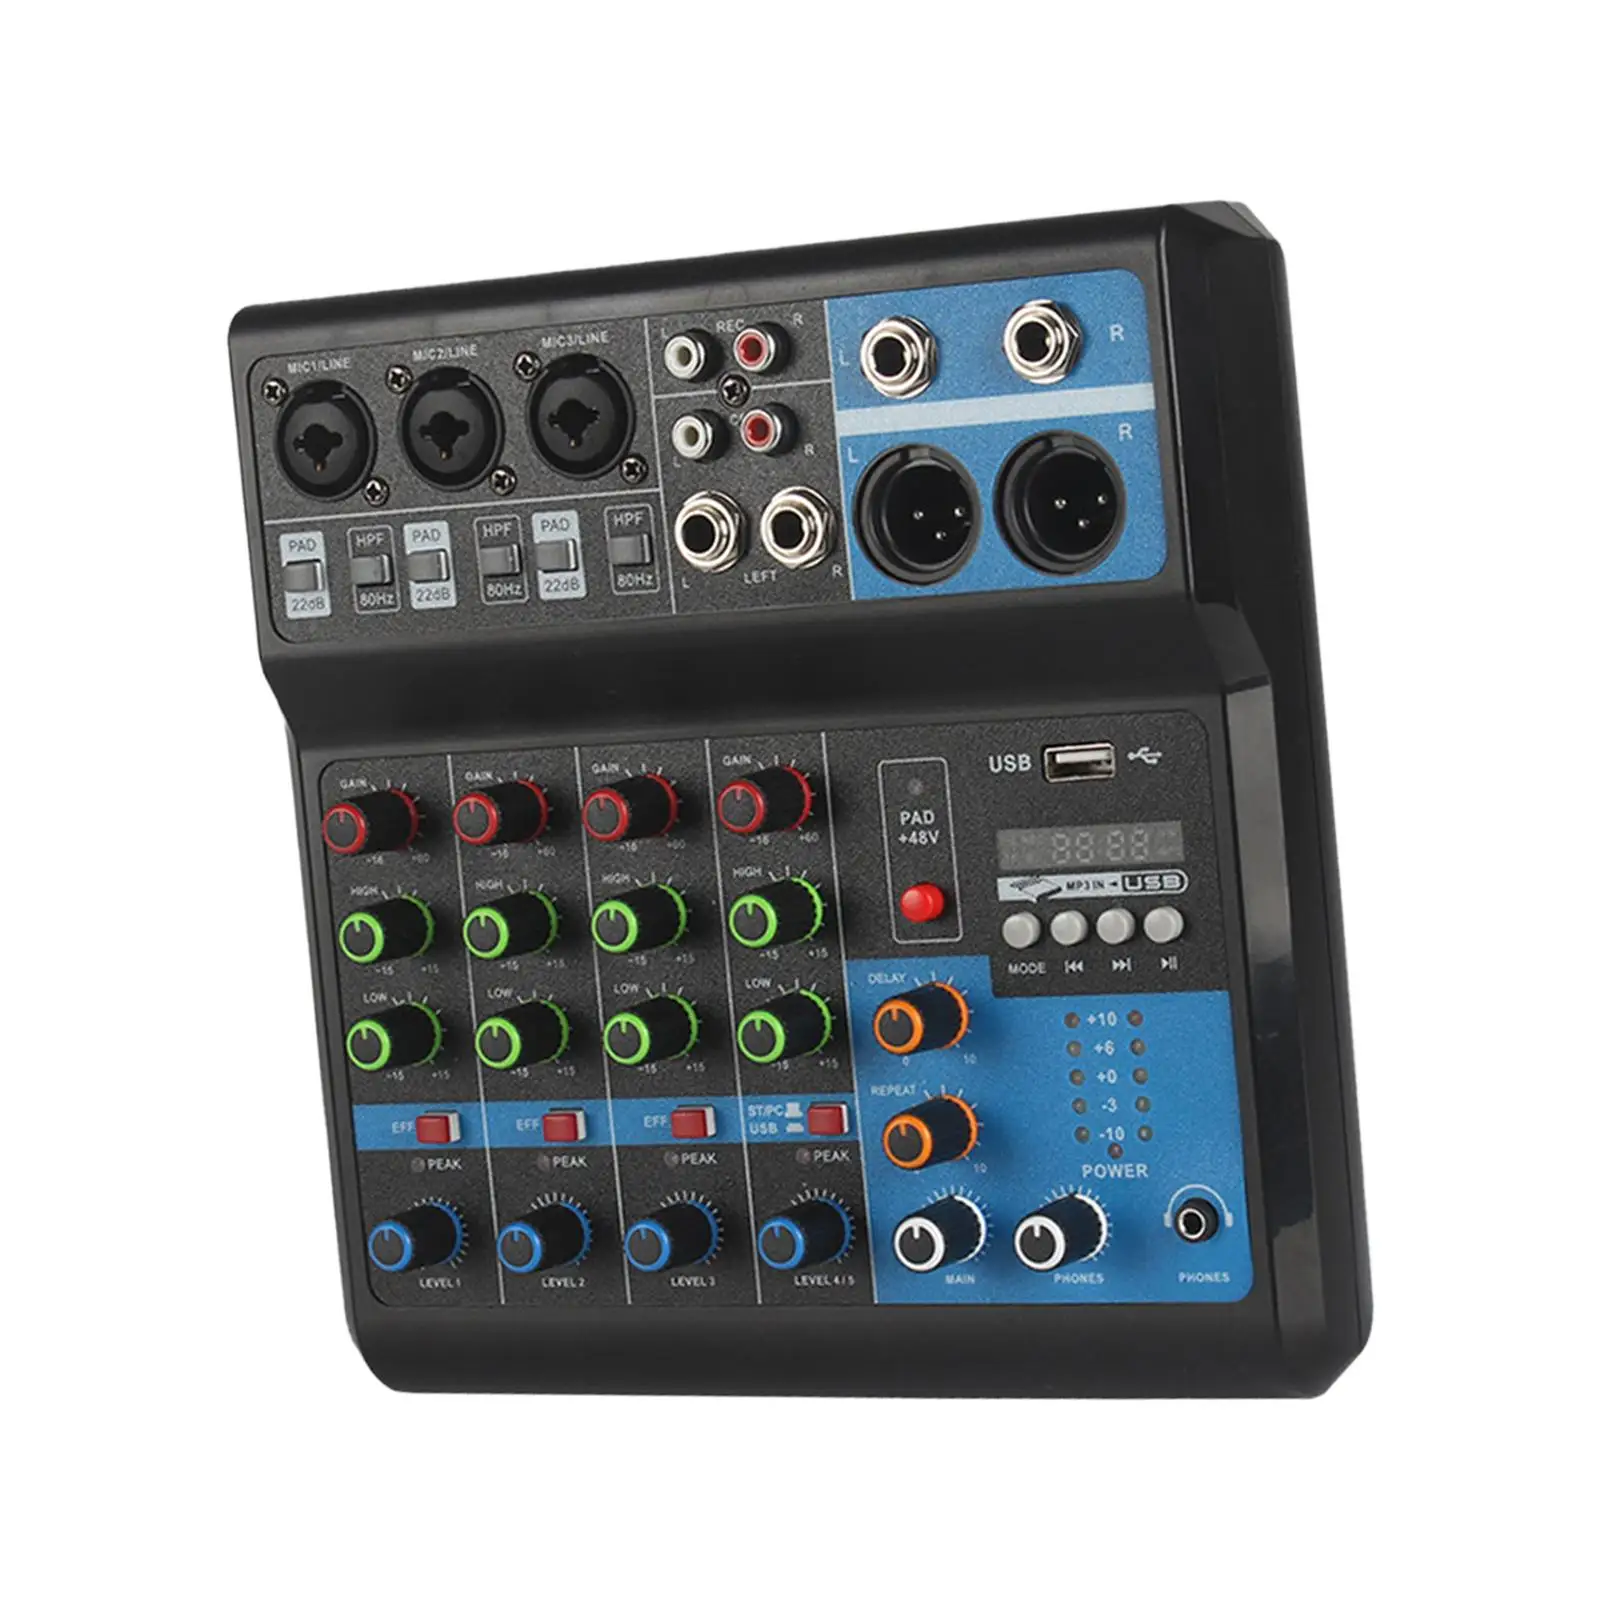 DJ Mixing Board 5 Channel Mixer Audio Mixer US 110V Built in Reverb Effect Stable Transmission Measure 8x8x2.6inch for Karaoke